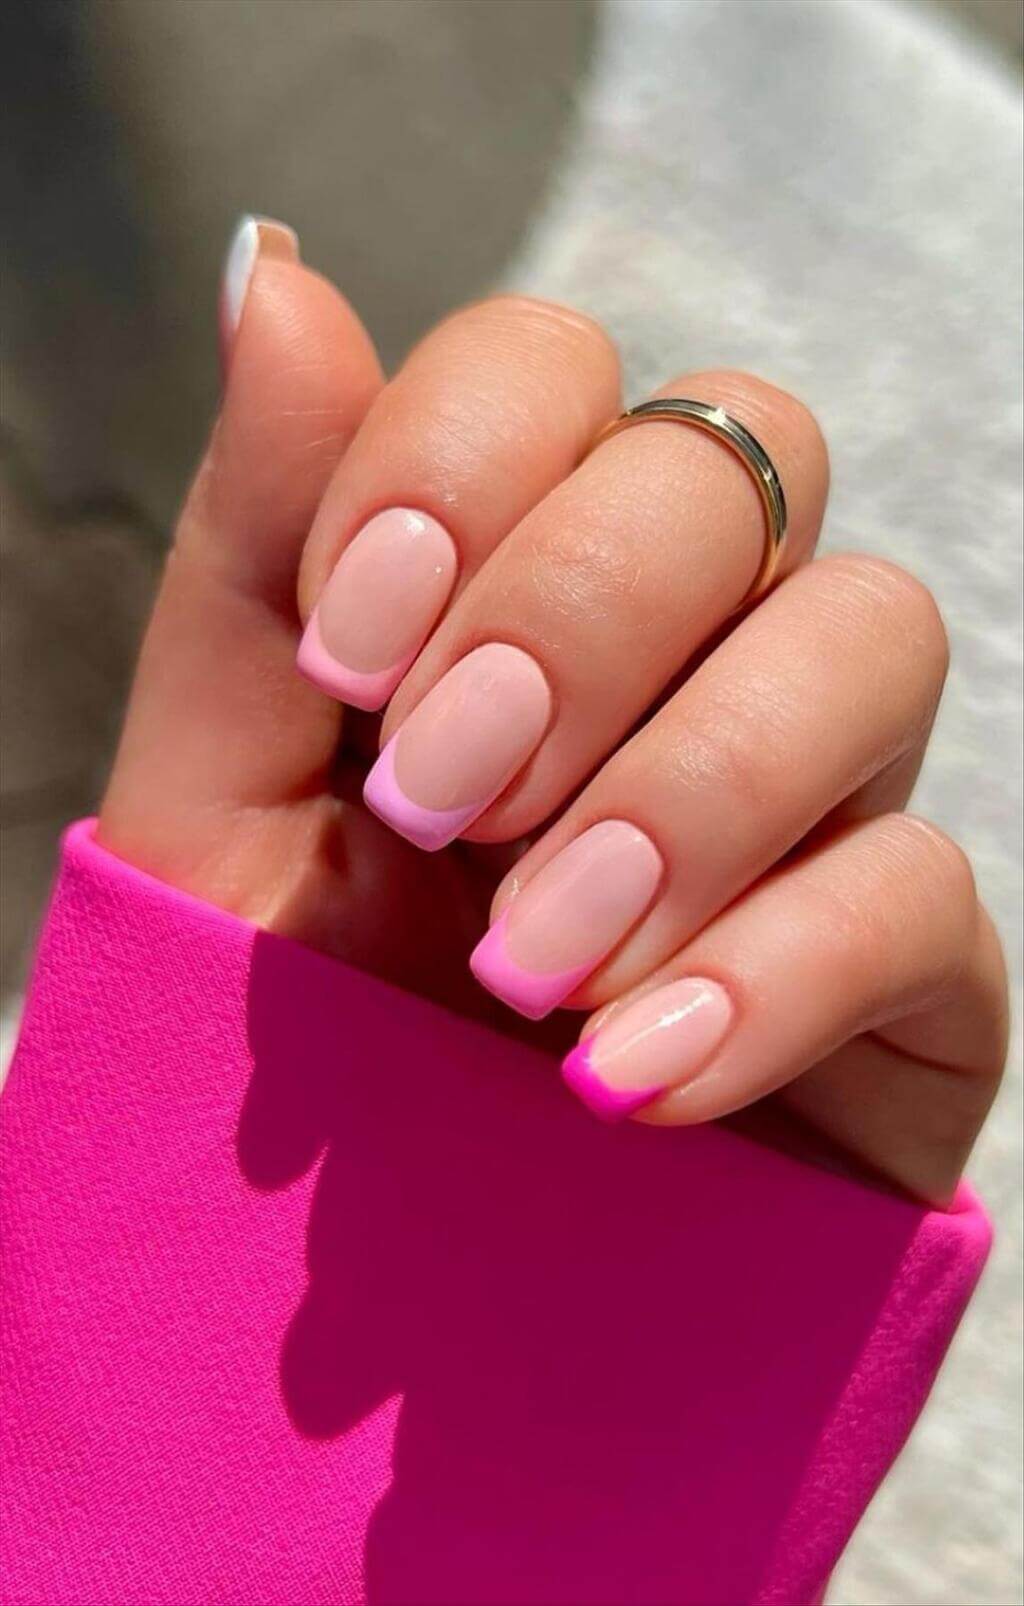 french tip nail designs